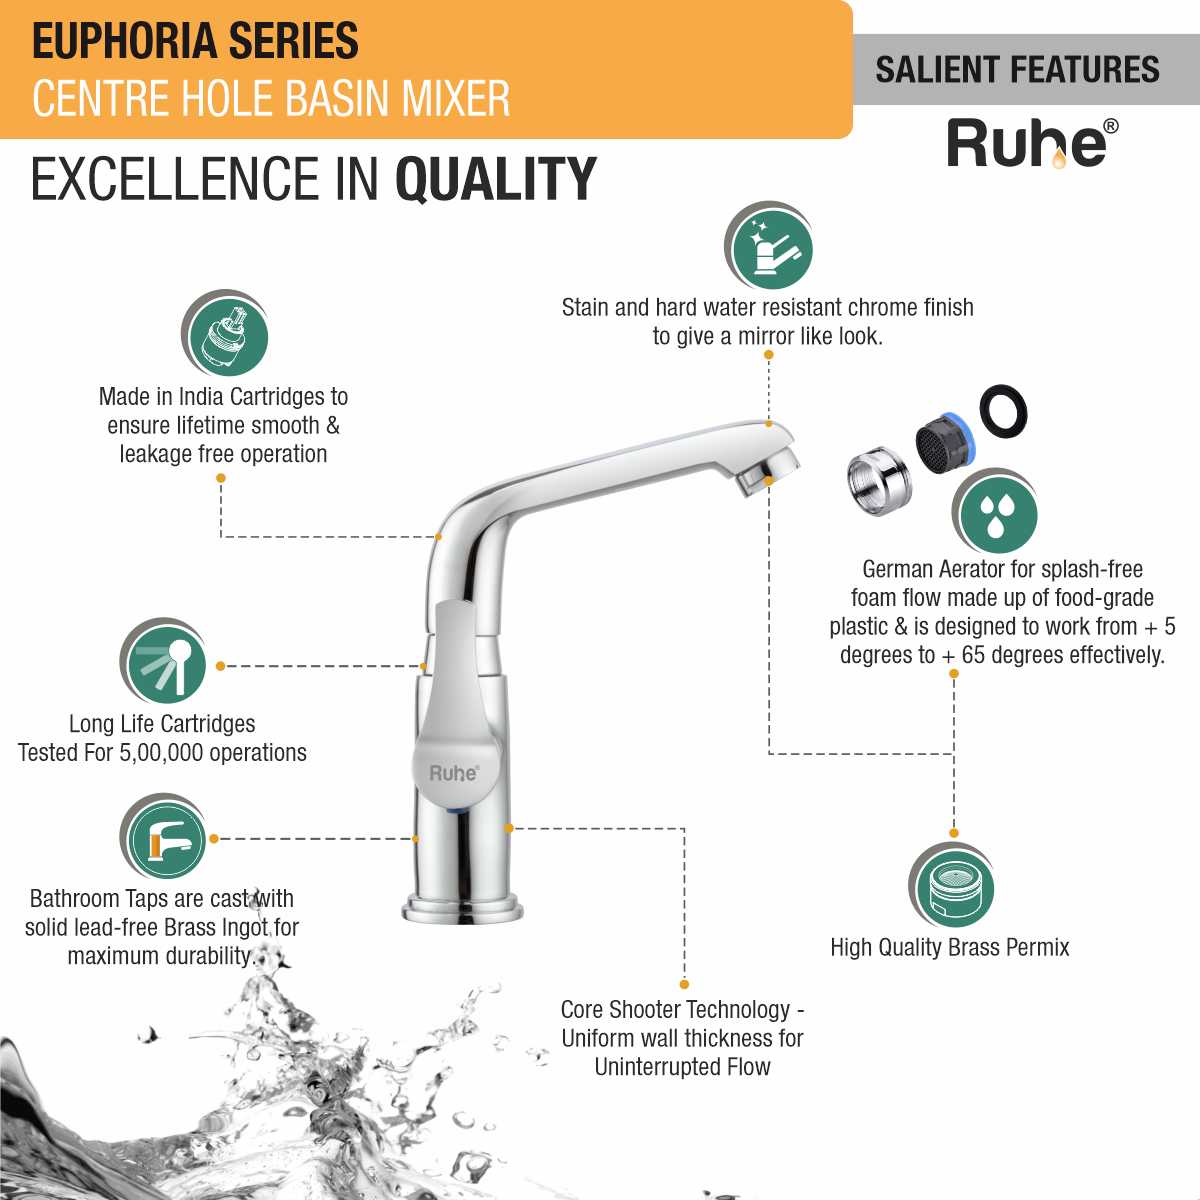 Euphoria Centre Hole Basin Mixer with Small (7 inches) Swivel Spout Faucet features